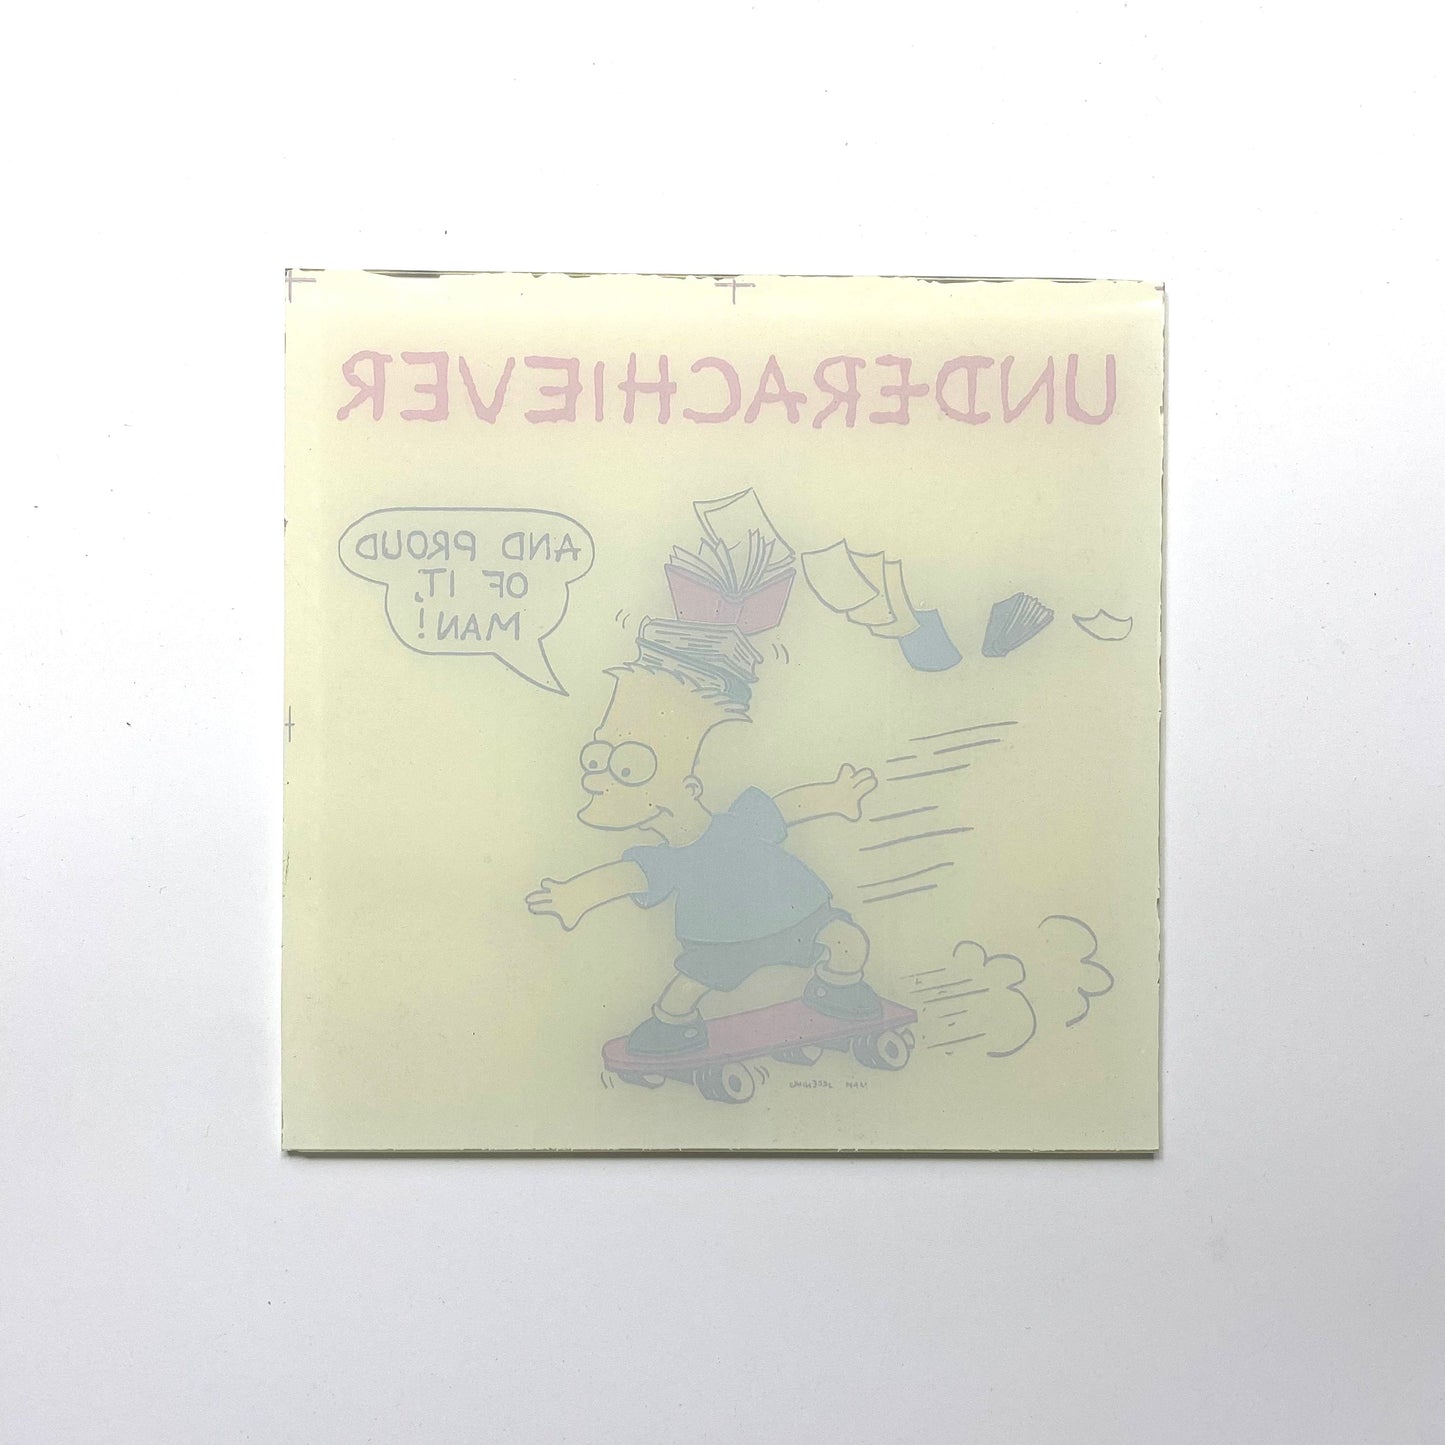 Vintage Bart Simpson “Underachiever And Proud Of It, Man!” Whiskey Glass Carnival Fair Prize Giveaway 6”x6” 1980’s